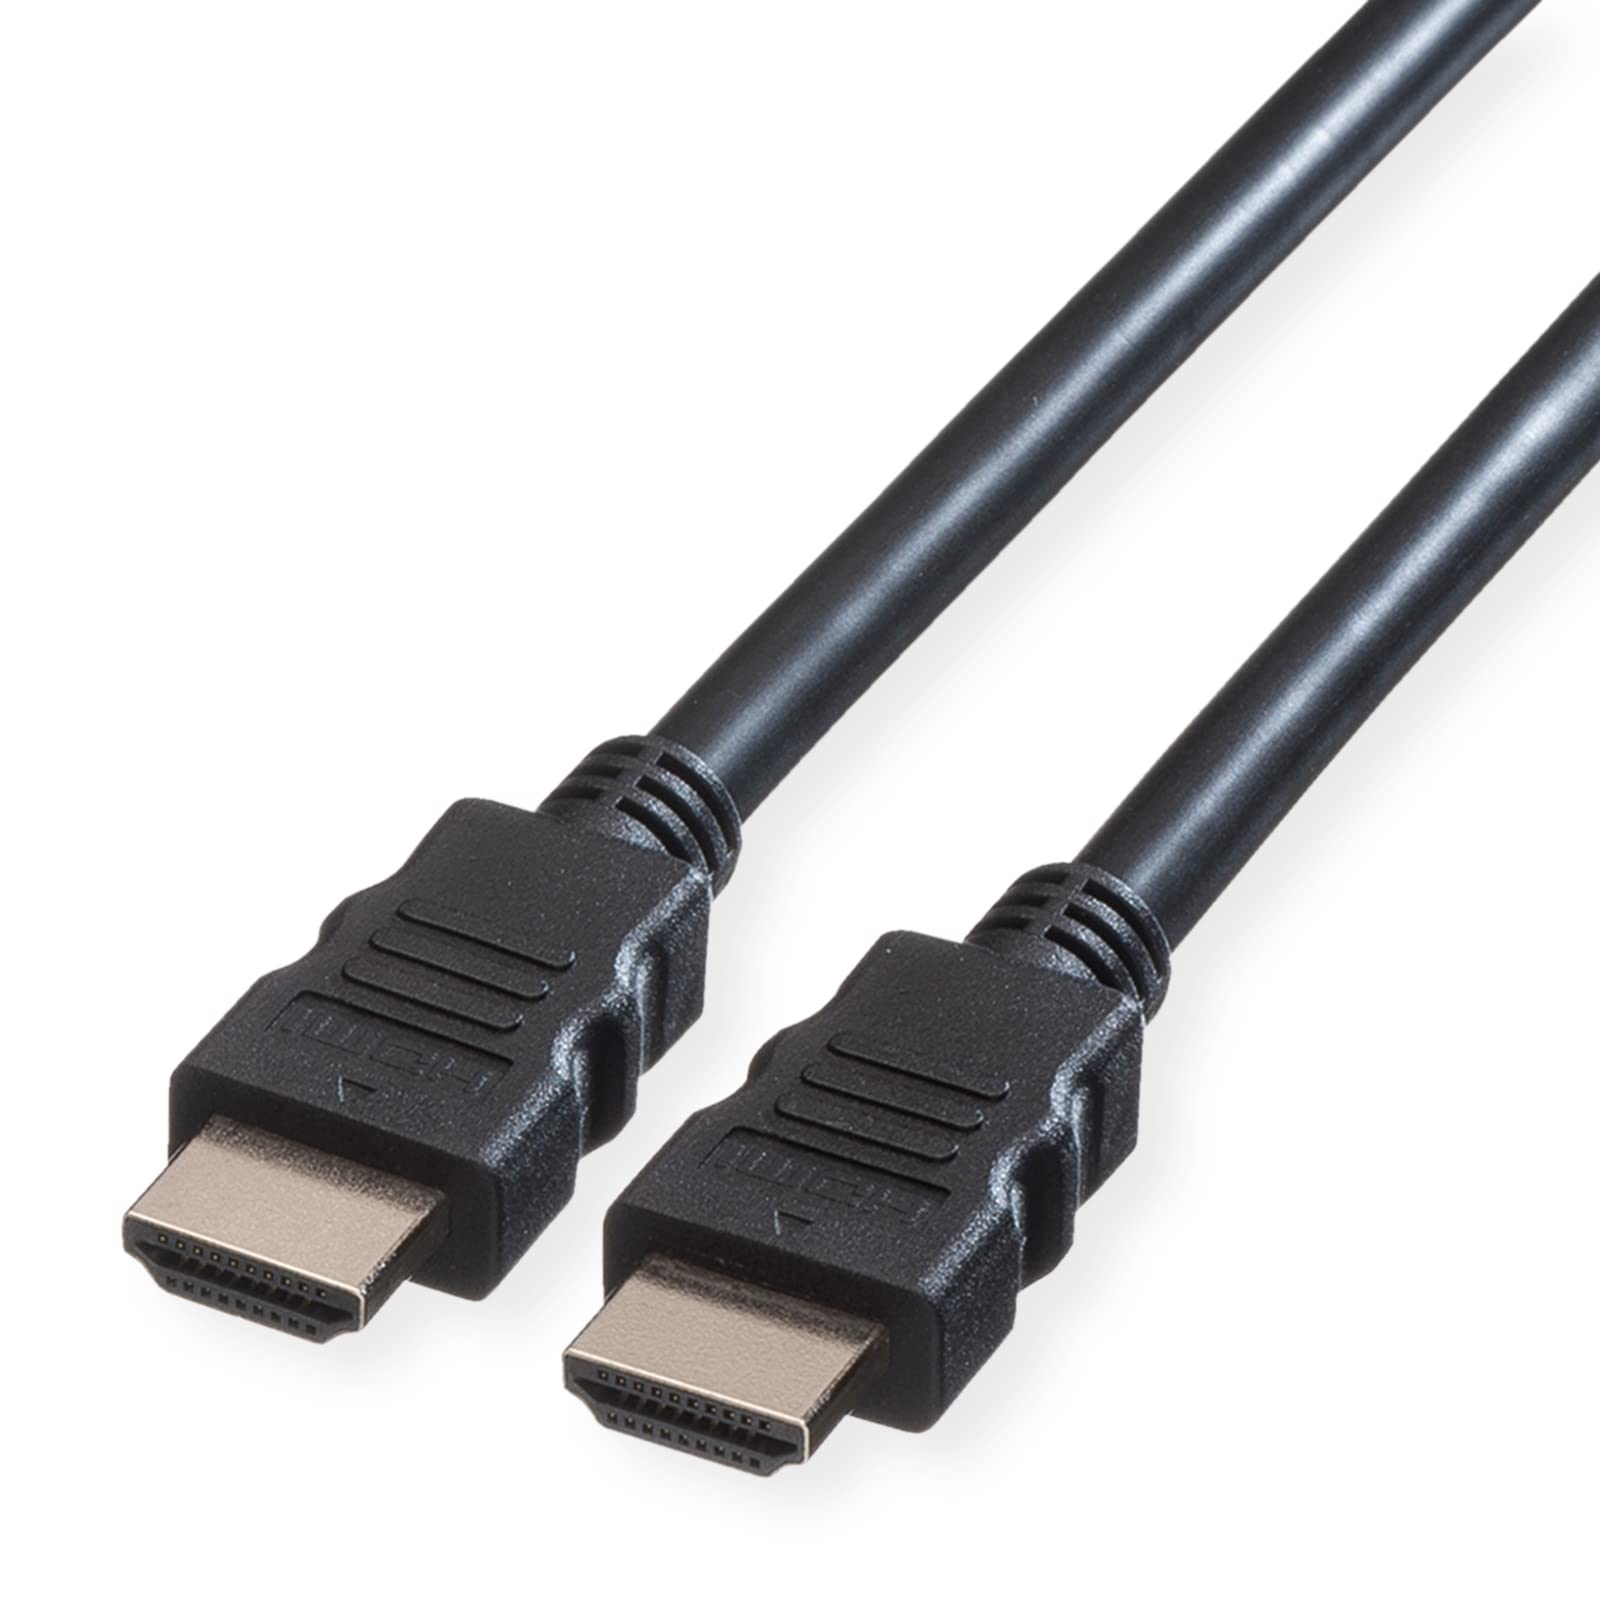 1 MT-PRO HDMI HIGH SPEED CABLE